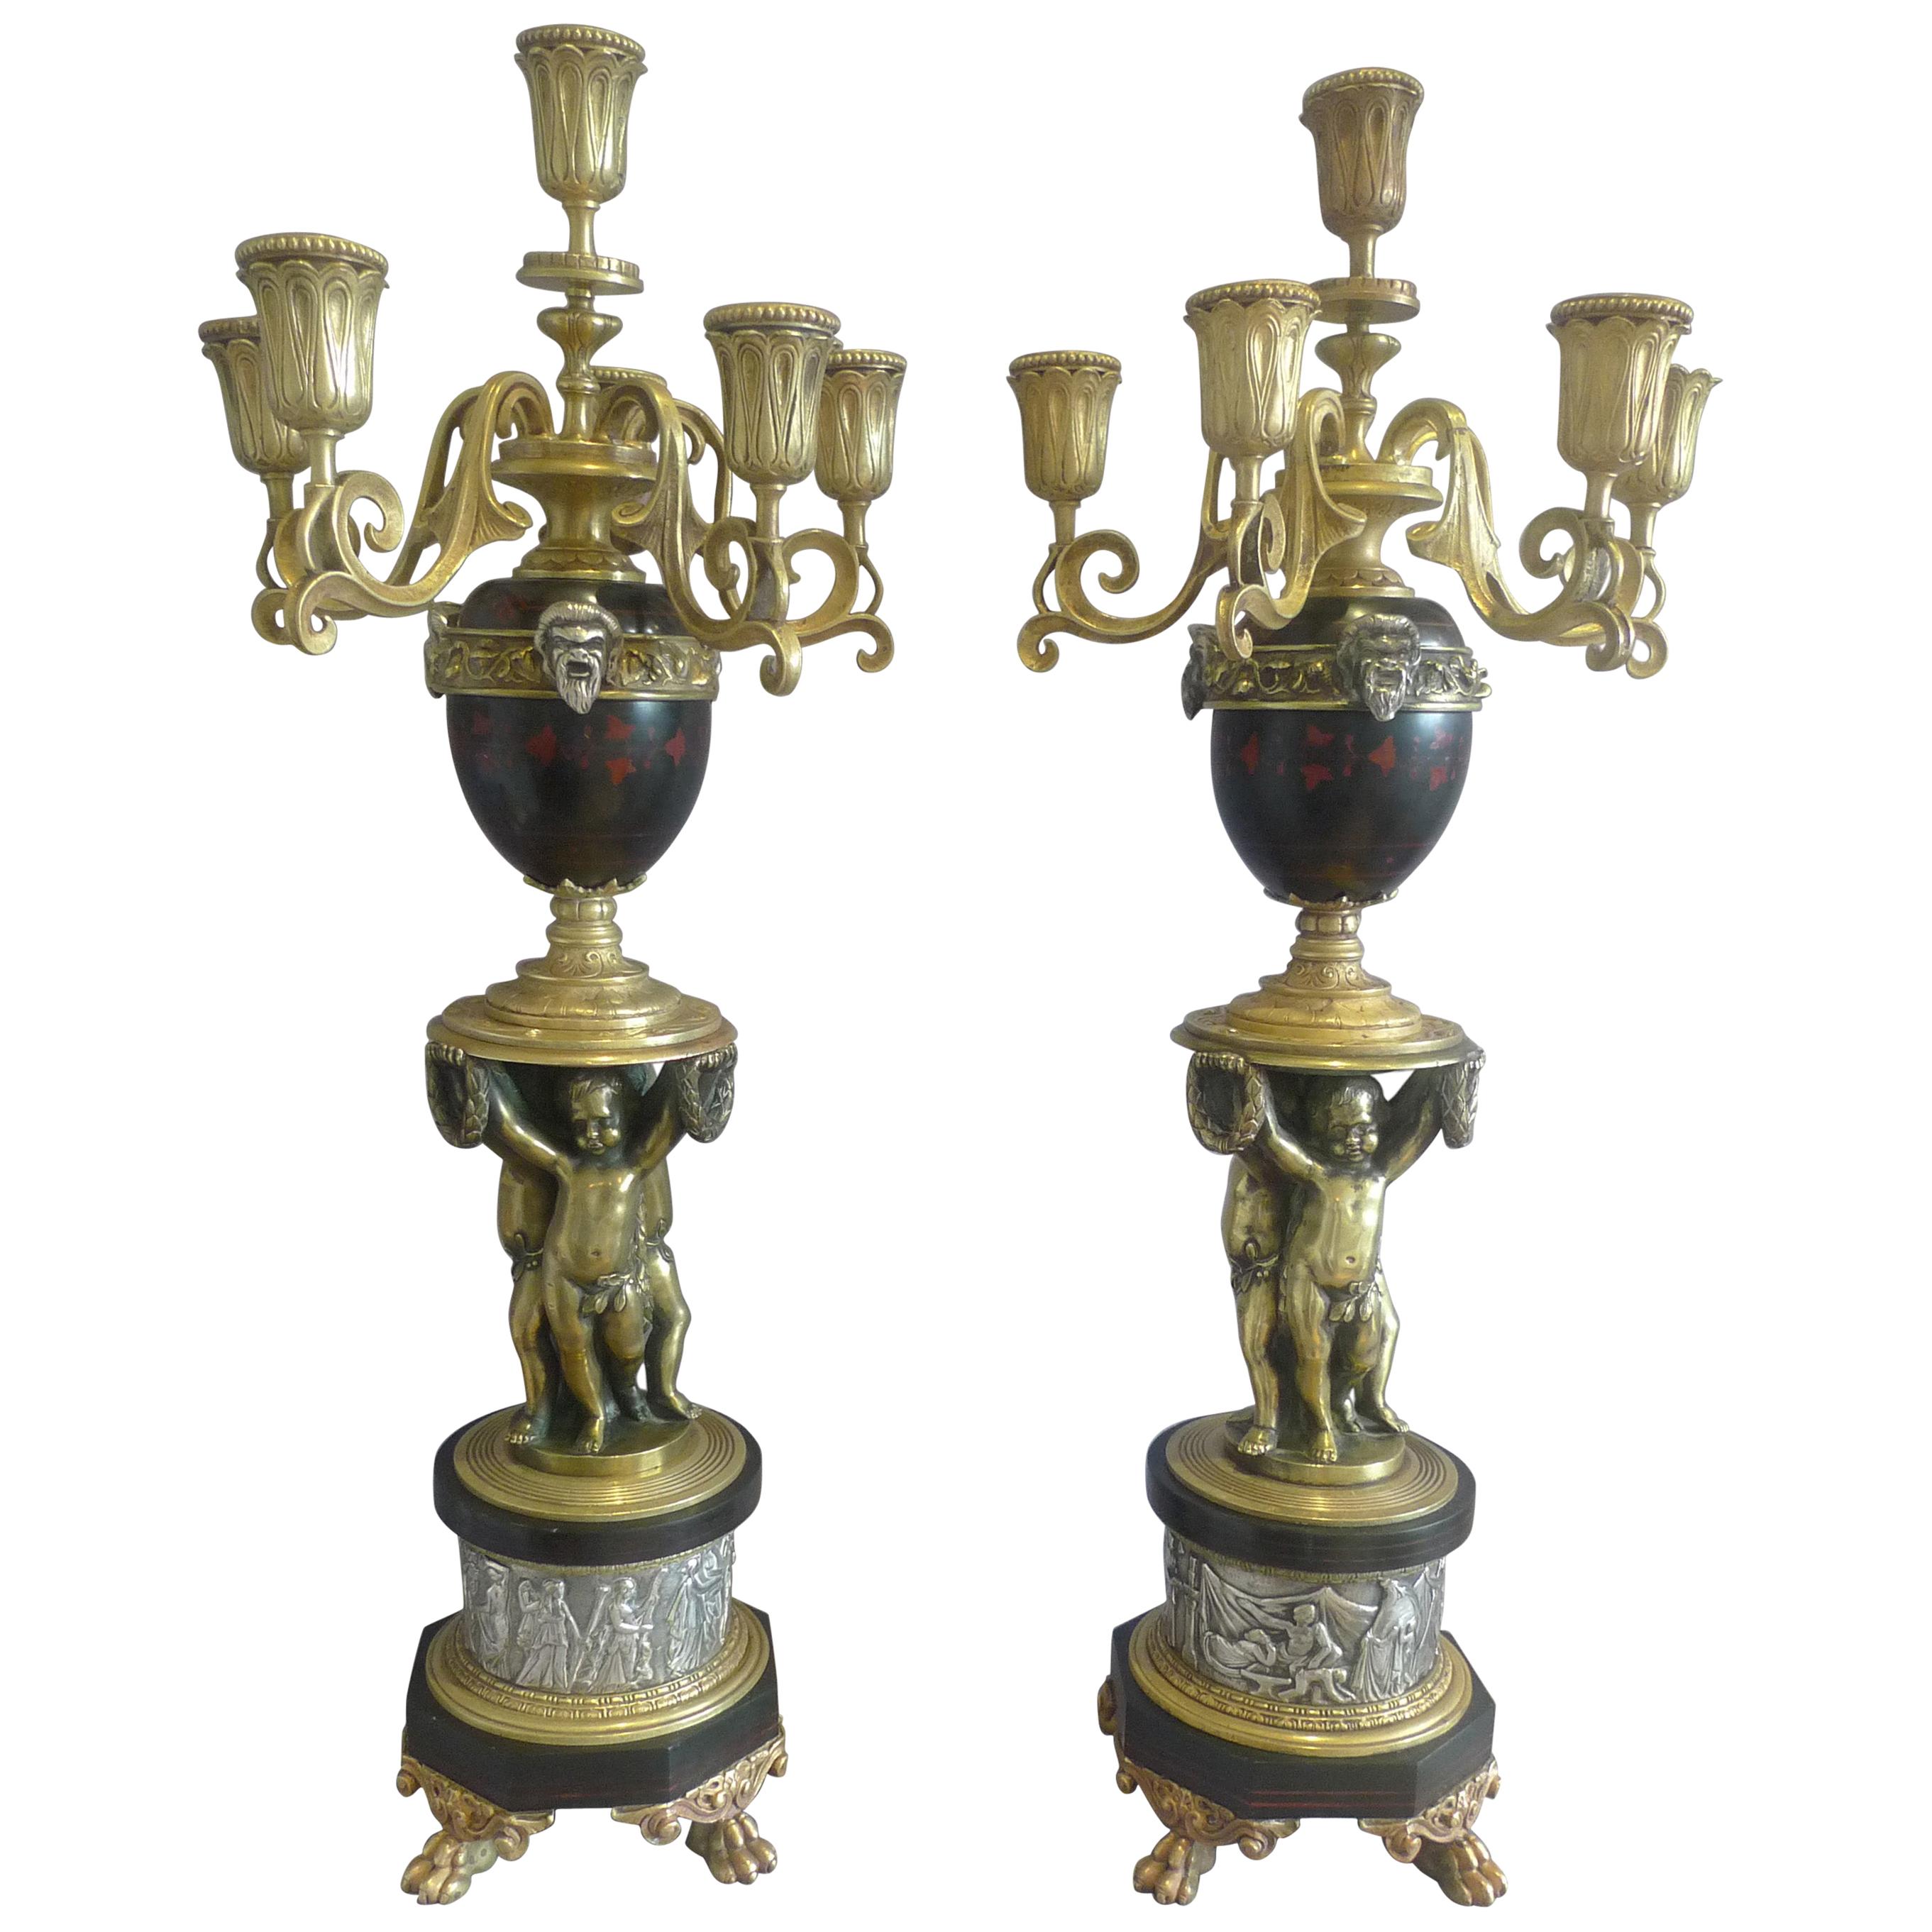 Unusual Pair of Gilt and Silvered Bronze, Inlaid Marble 6 Sconce Candelabra For Sale